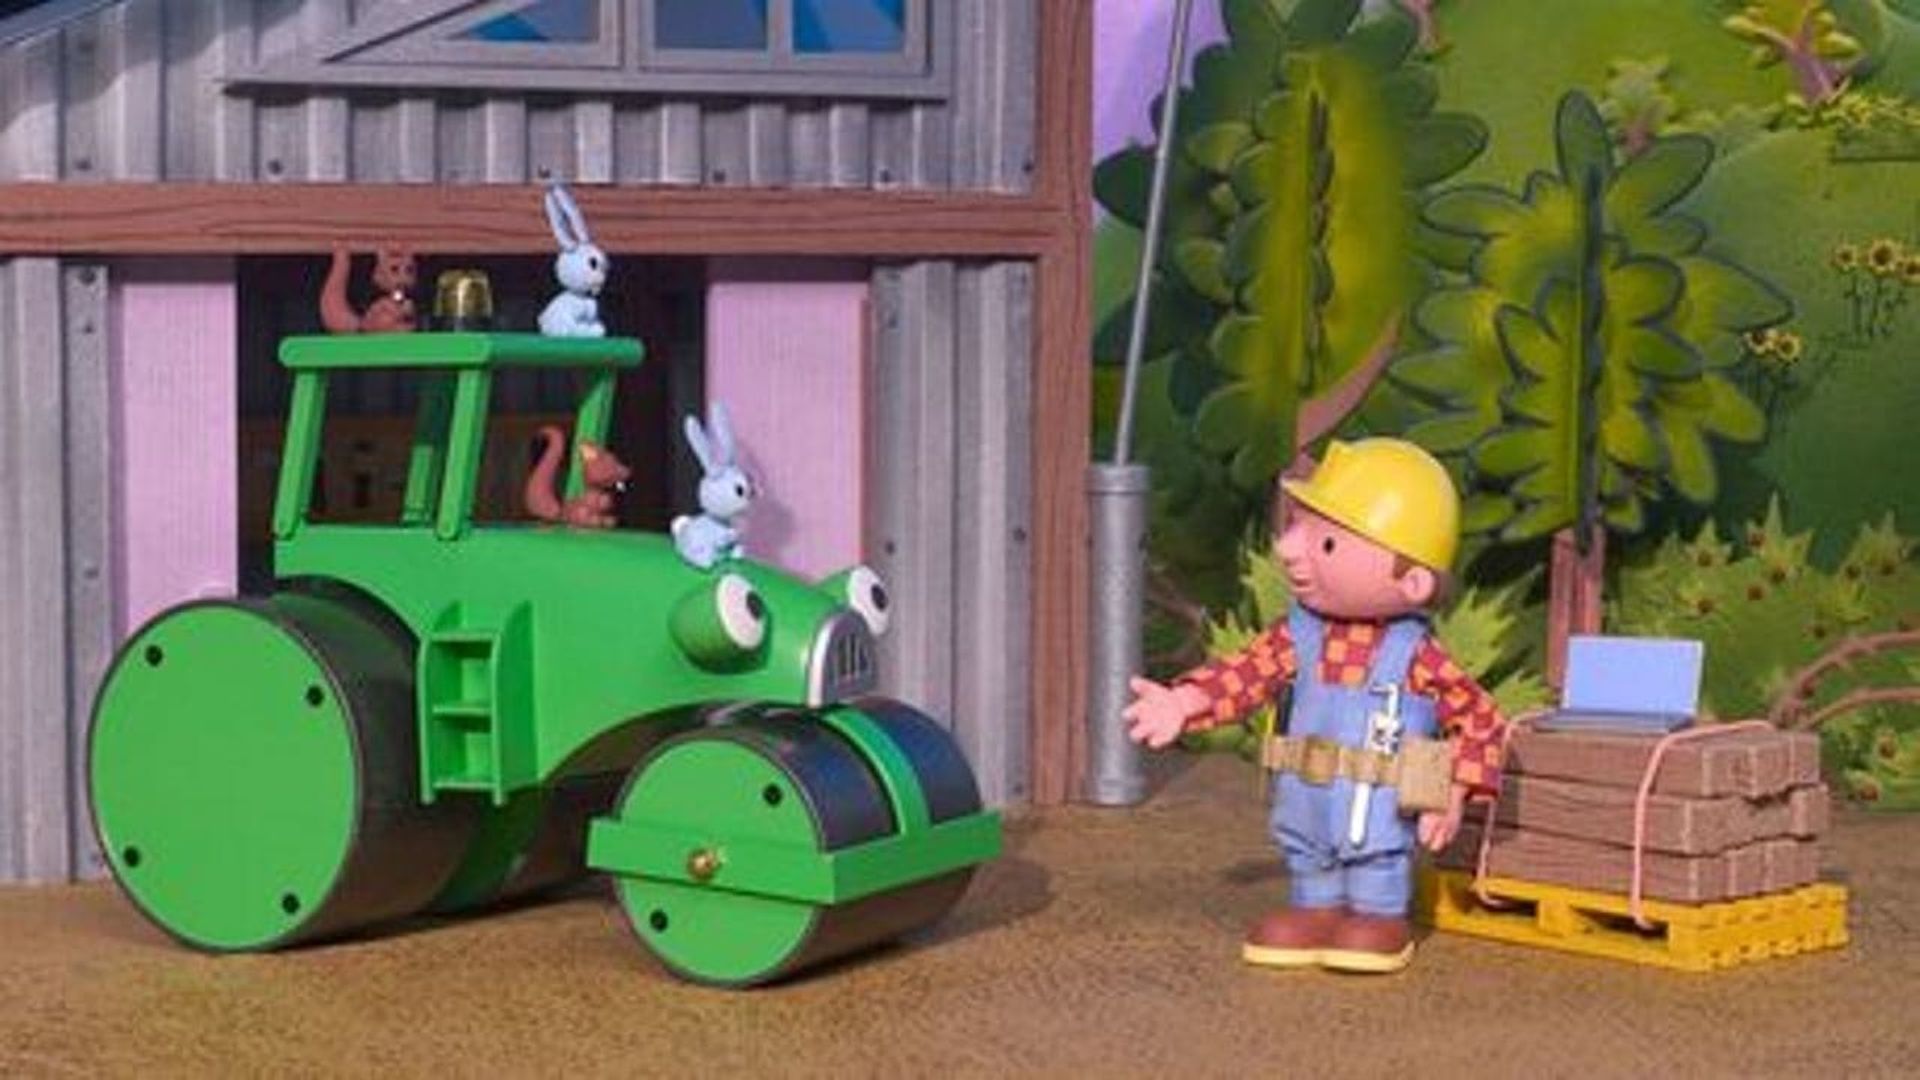 Bob the Builder on Site: Roads and Bridges background